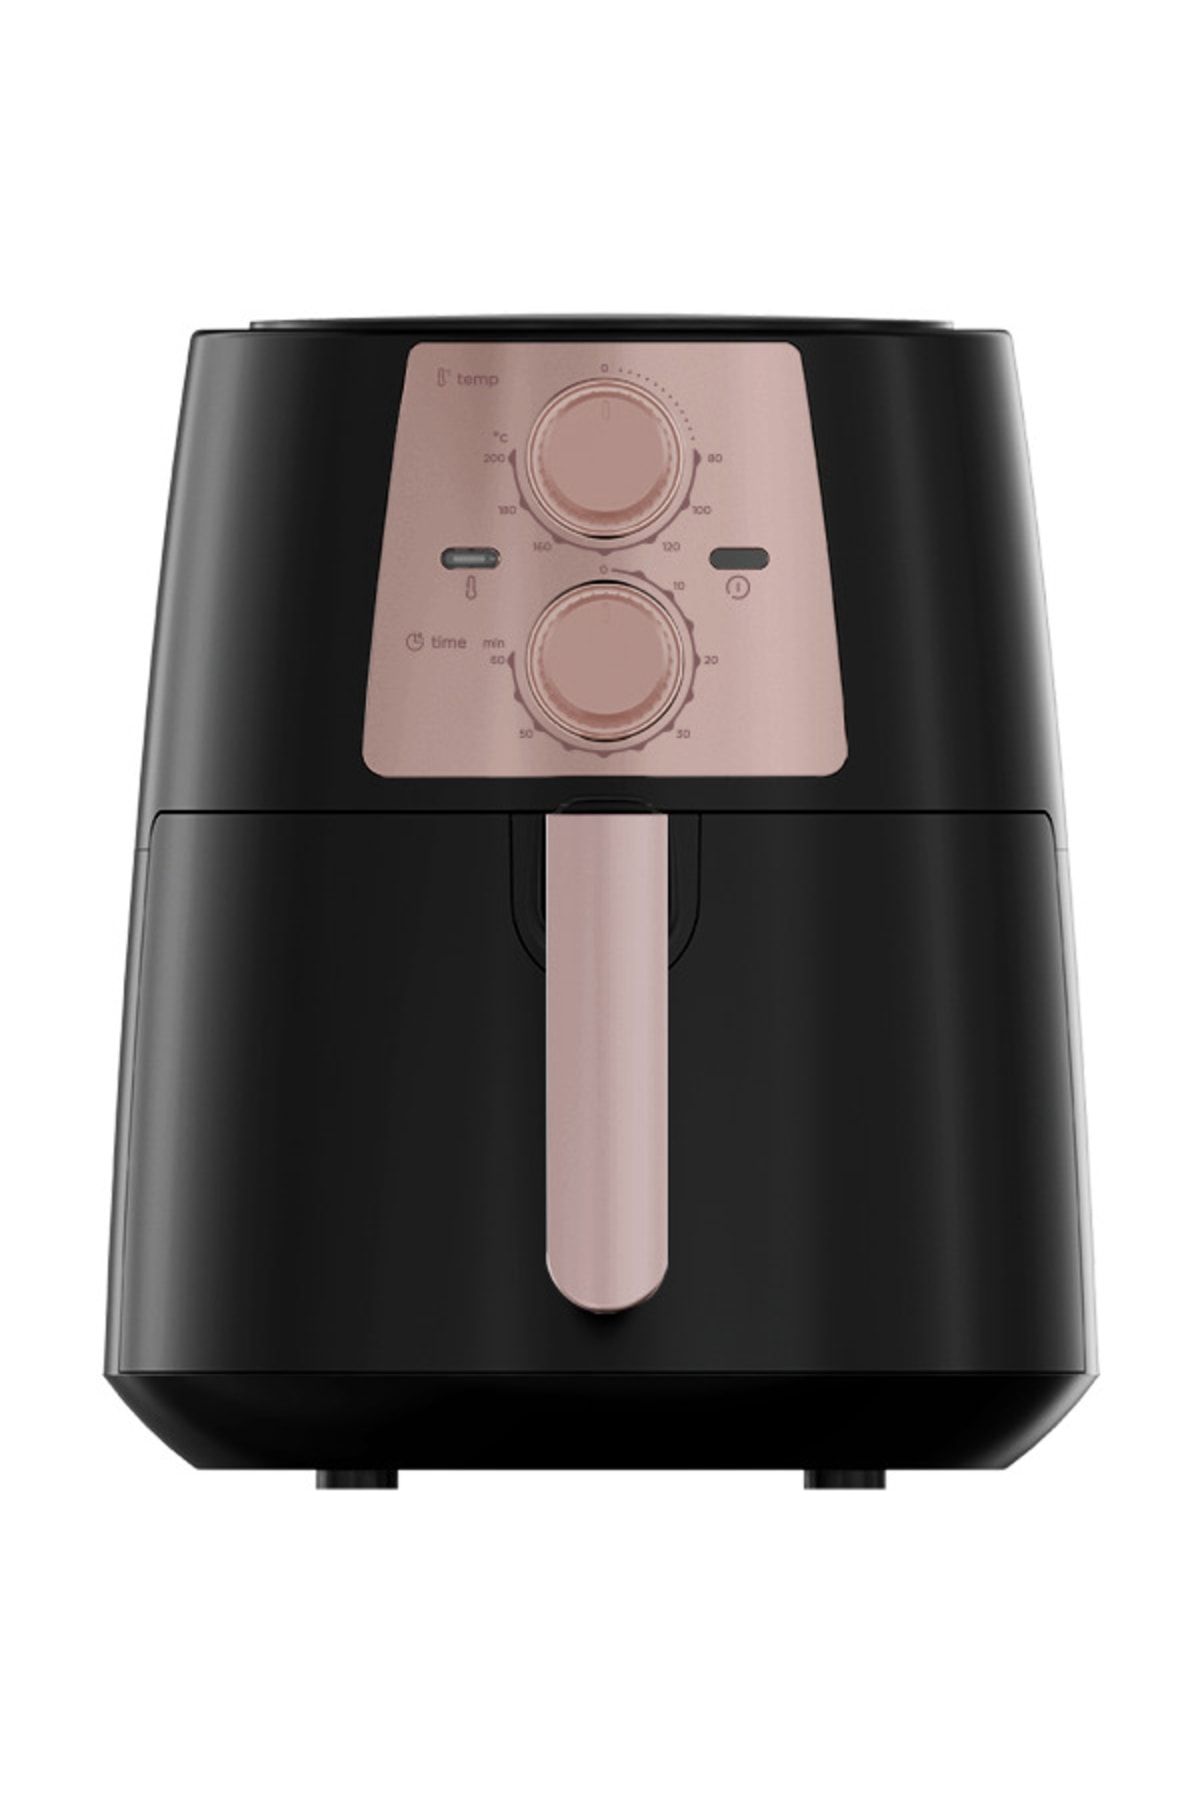 Luxell Fast Fryer Xl Fritöz Black Rose Fc5638 Air Fryer Fastcook Colour Series